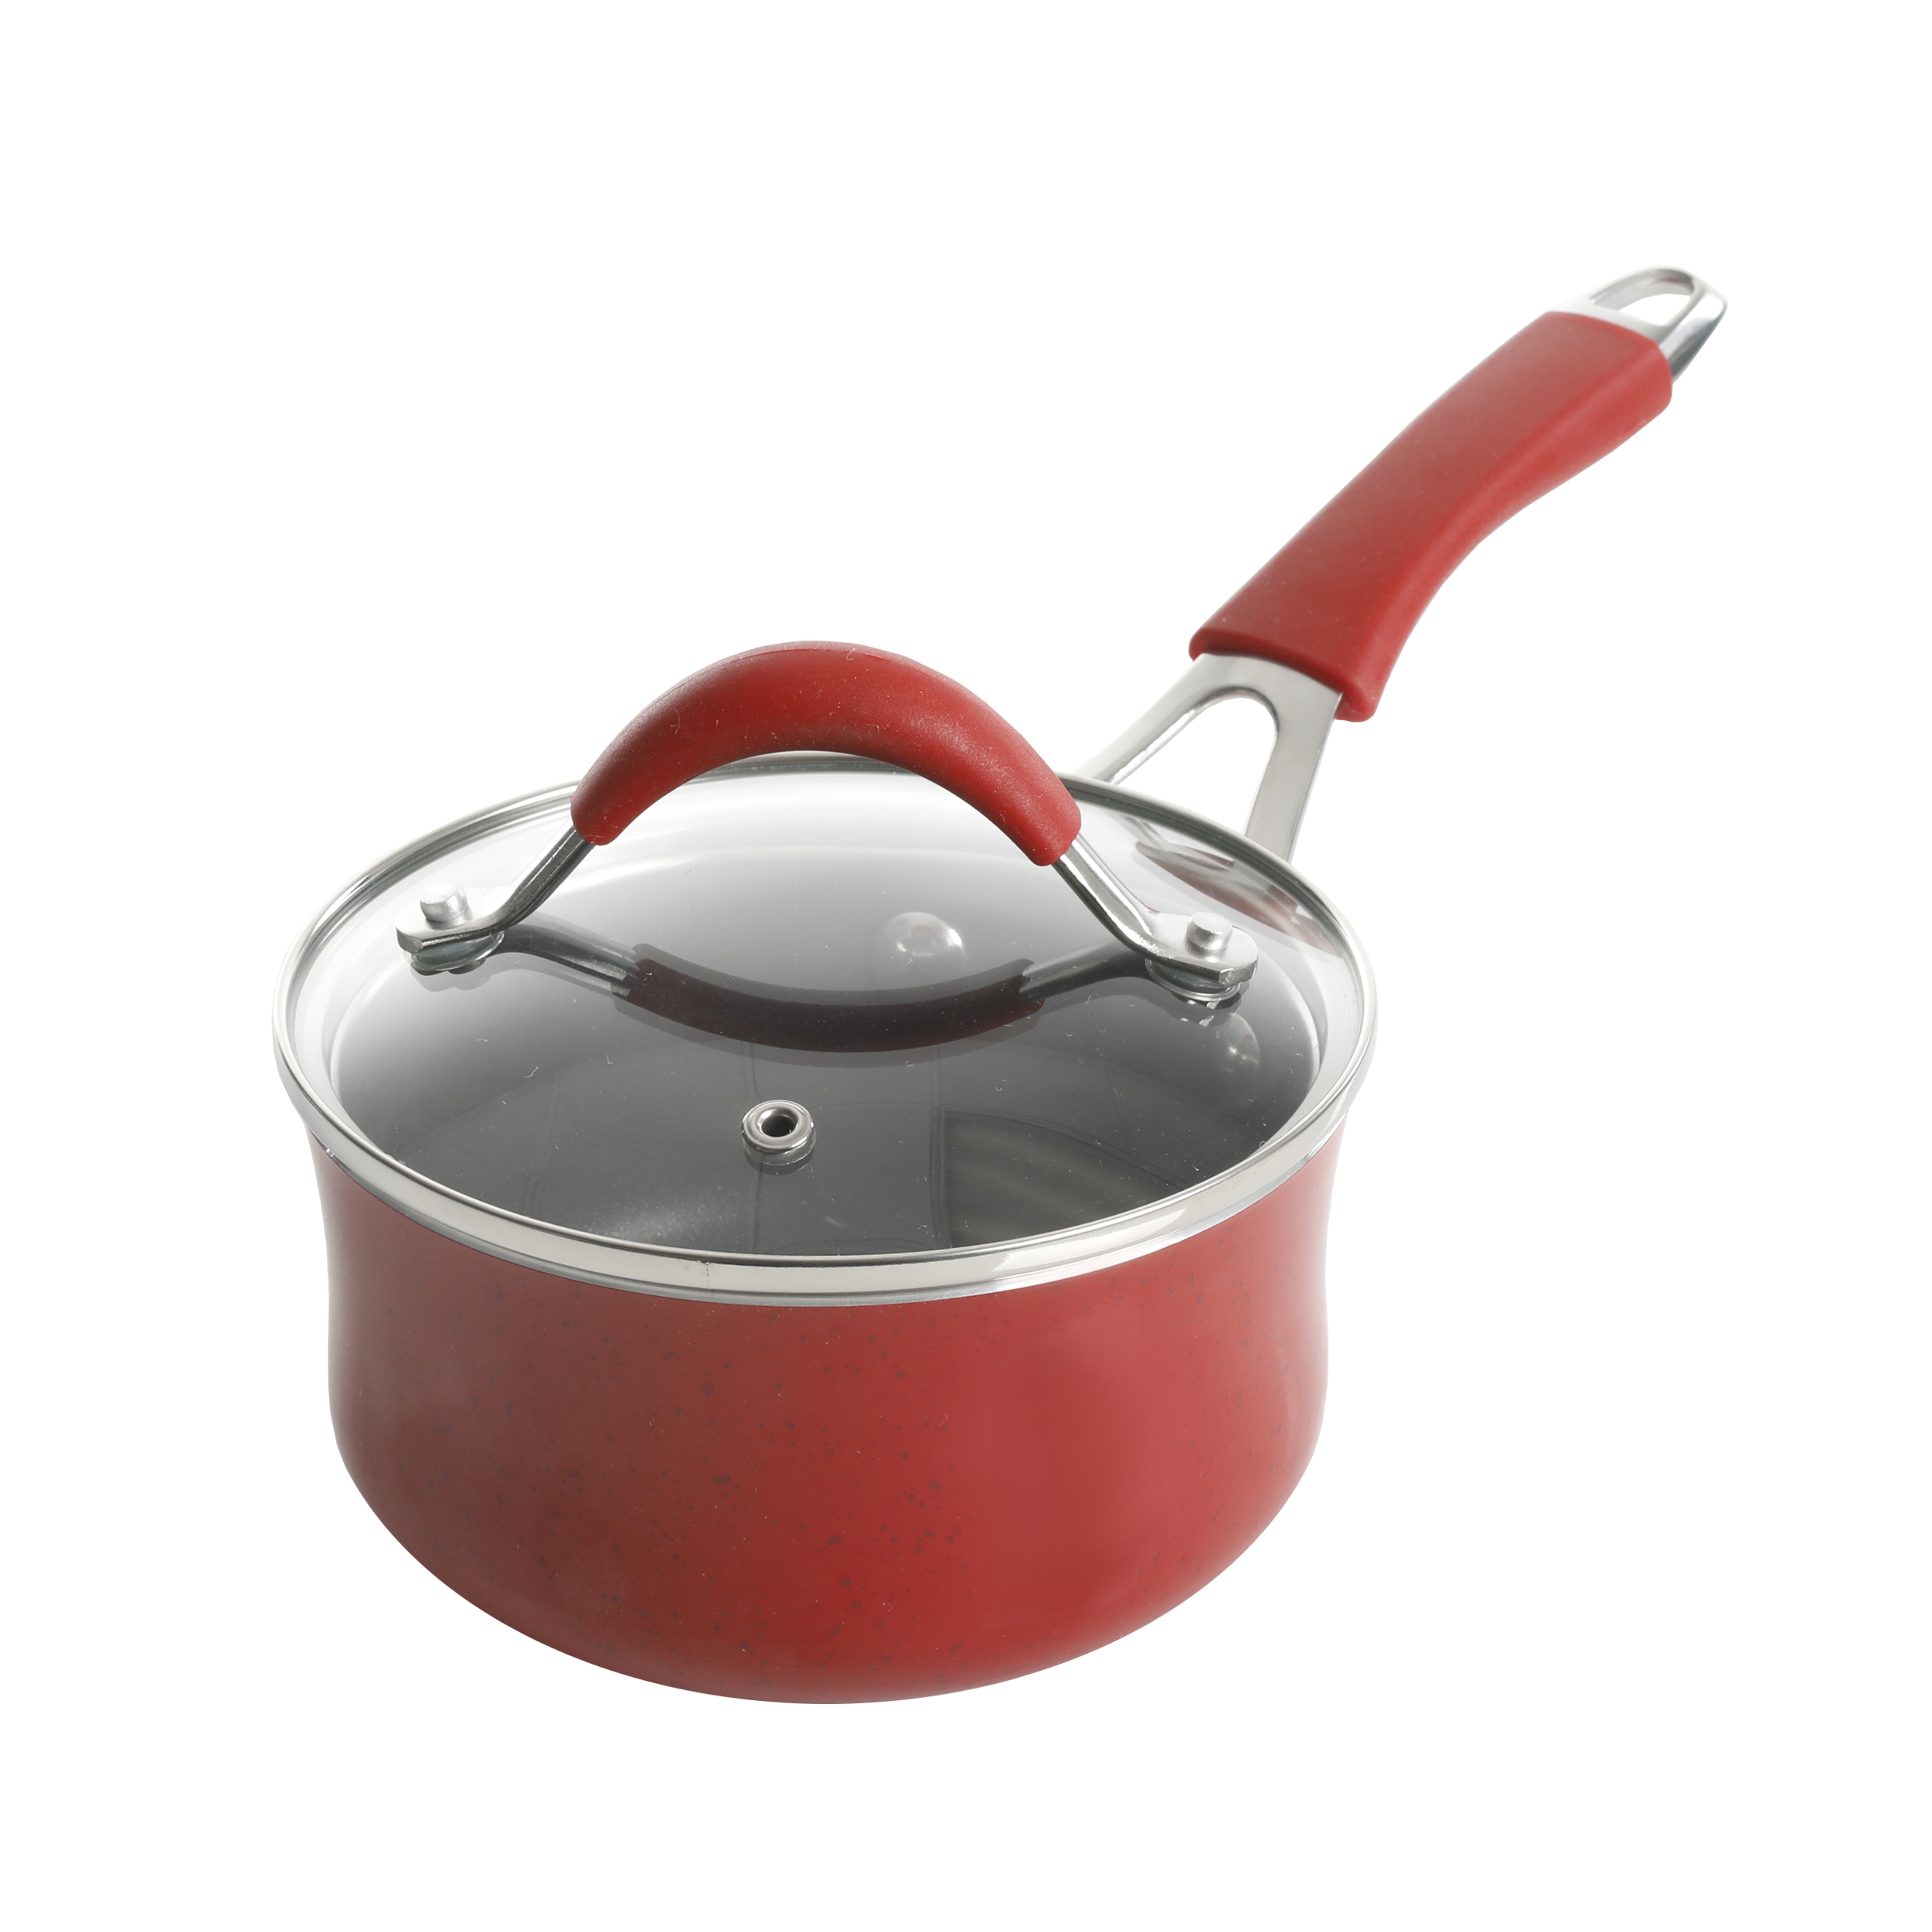 The Pioneer Woman Frontier 5-Piece Non-Stick Aluminum Cookware Set, Red - image 4 of 7